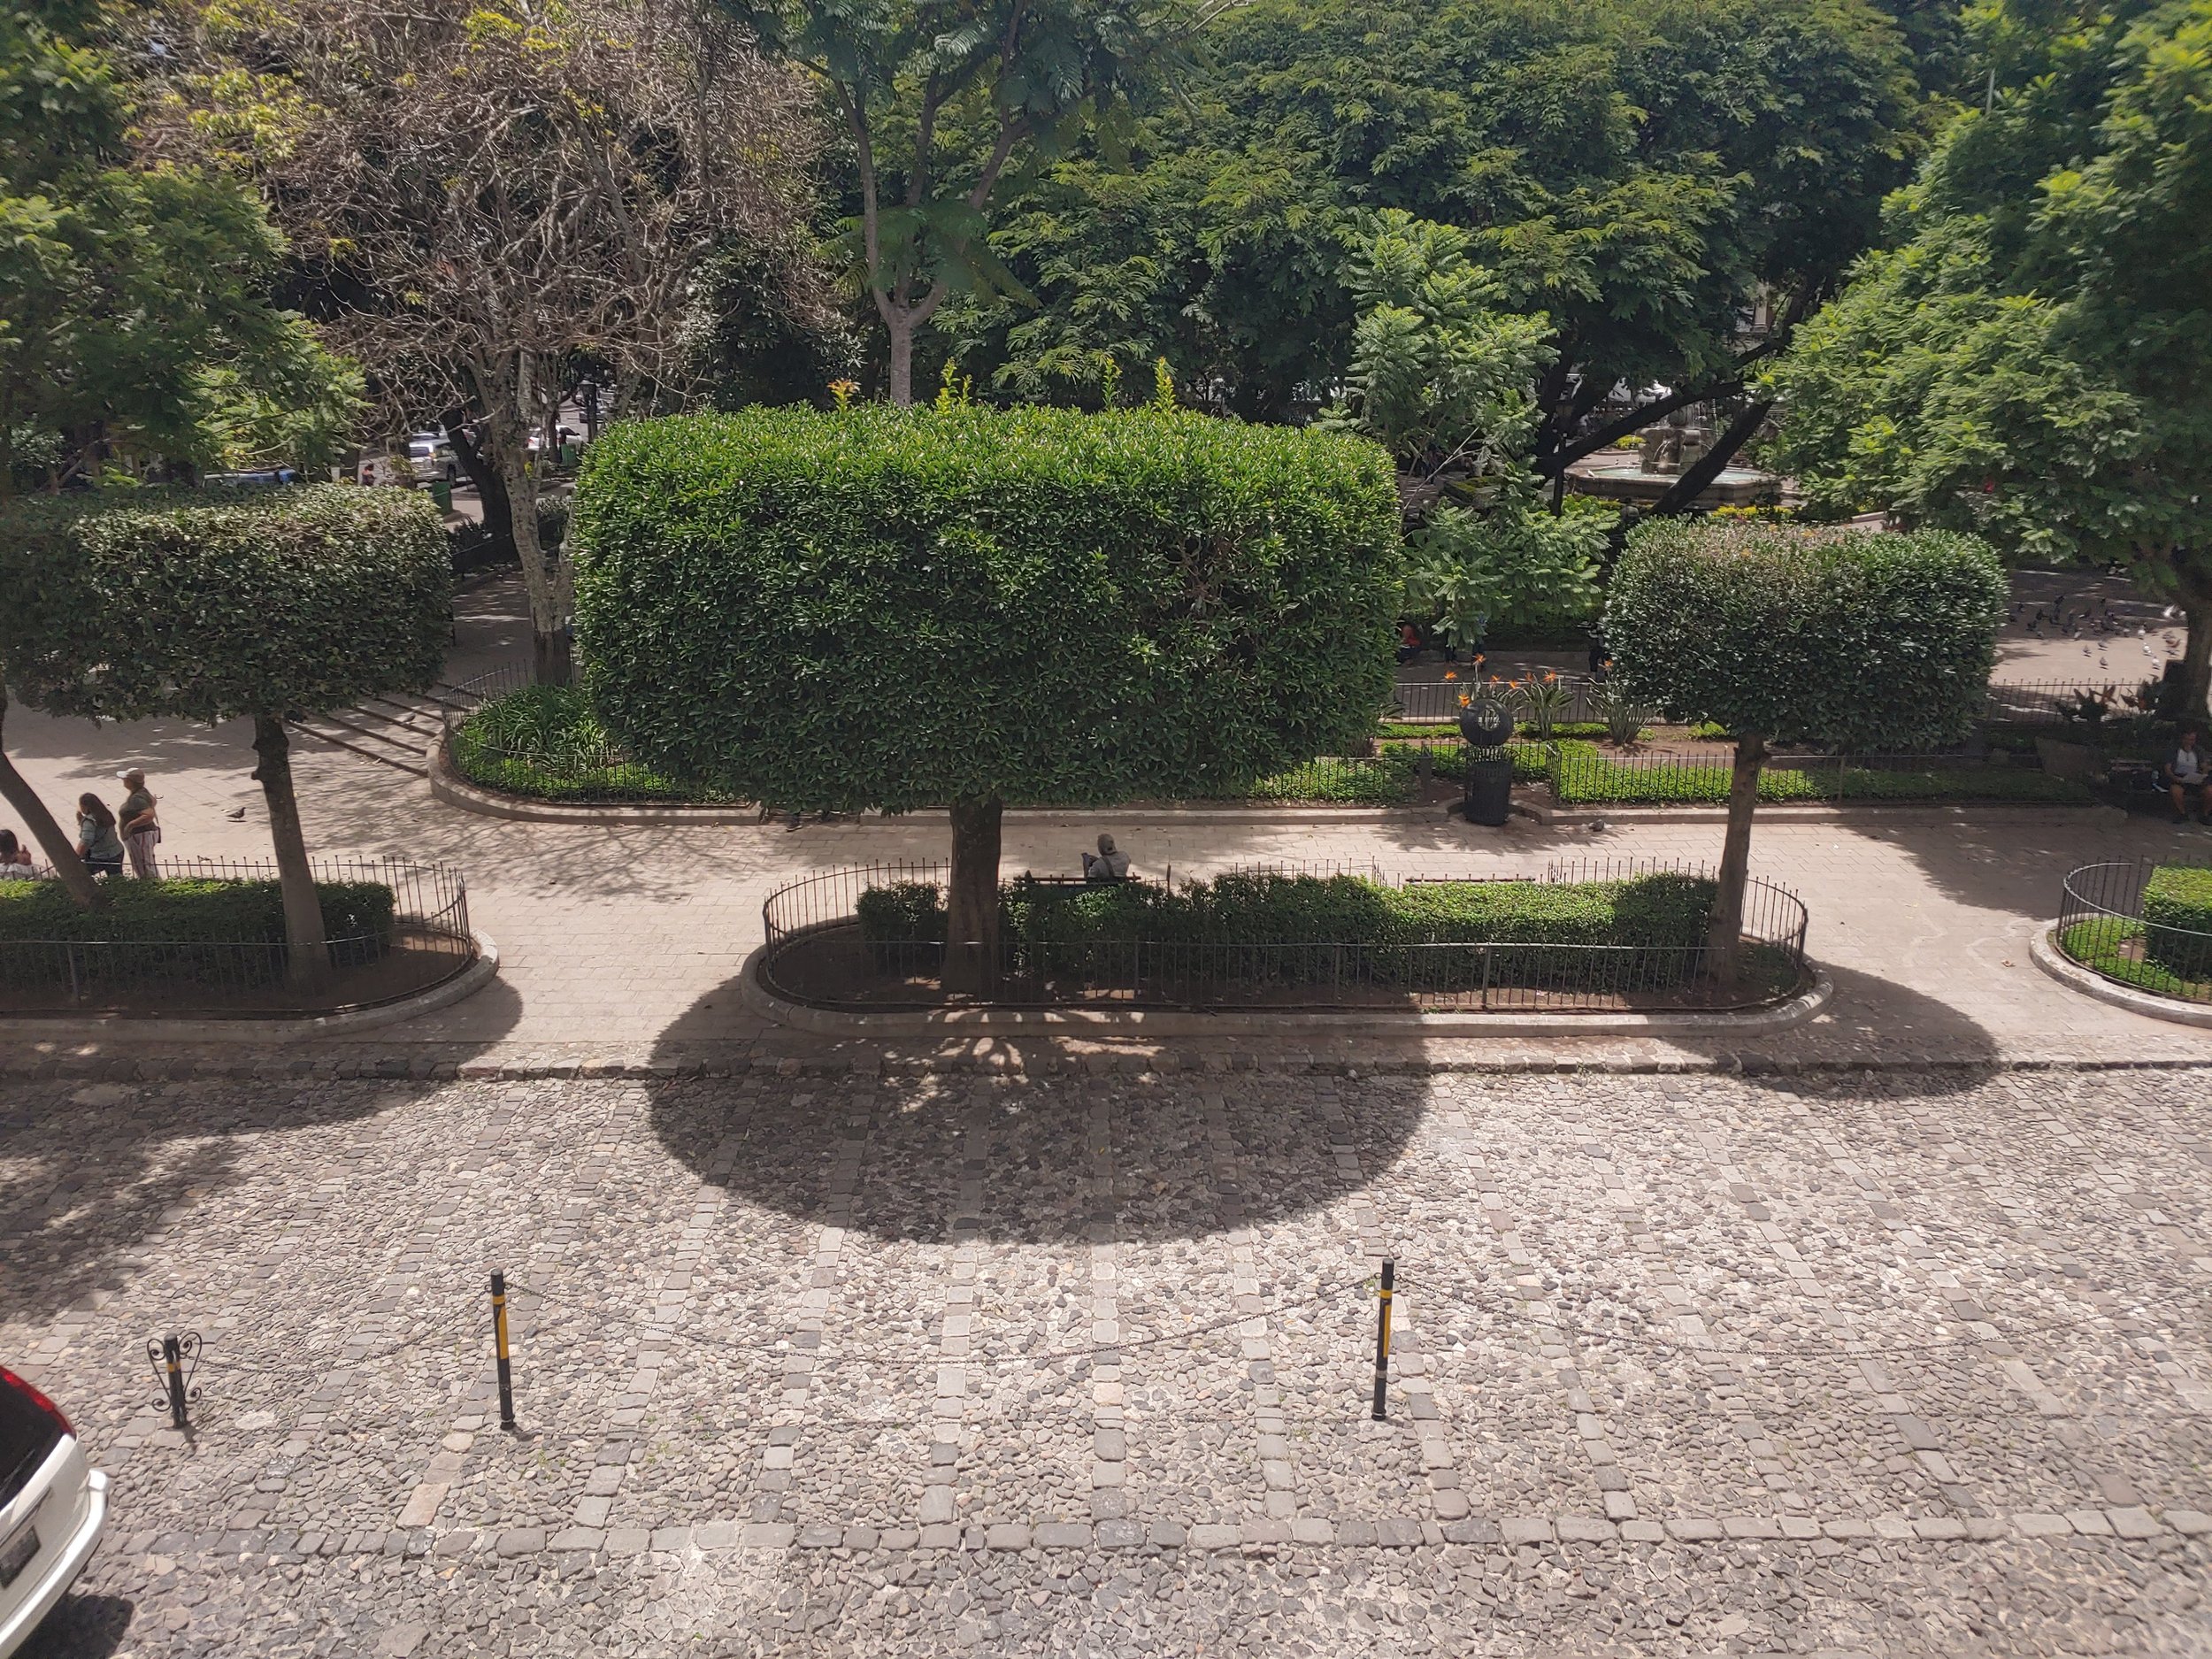 Topiaried Lime Trees in Central Square in Antigua